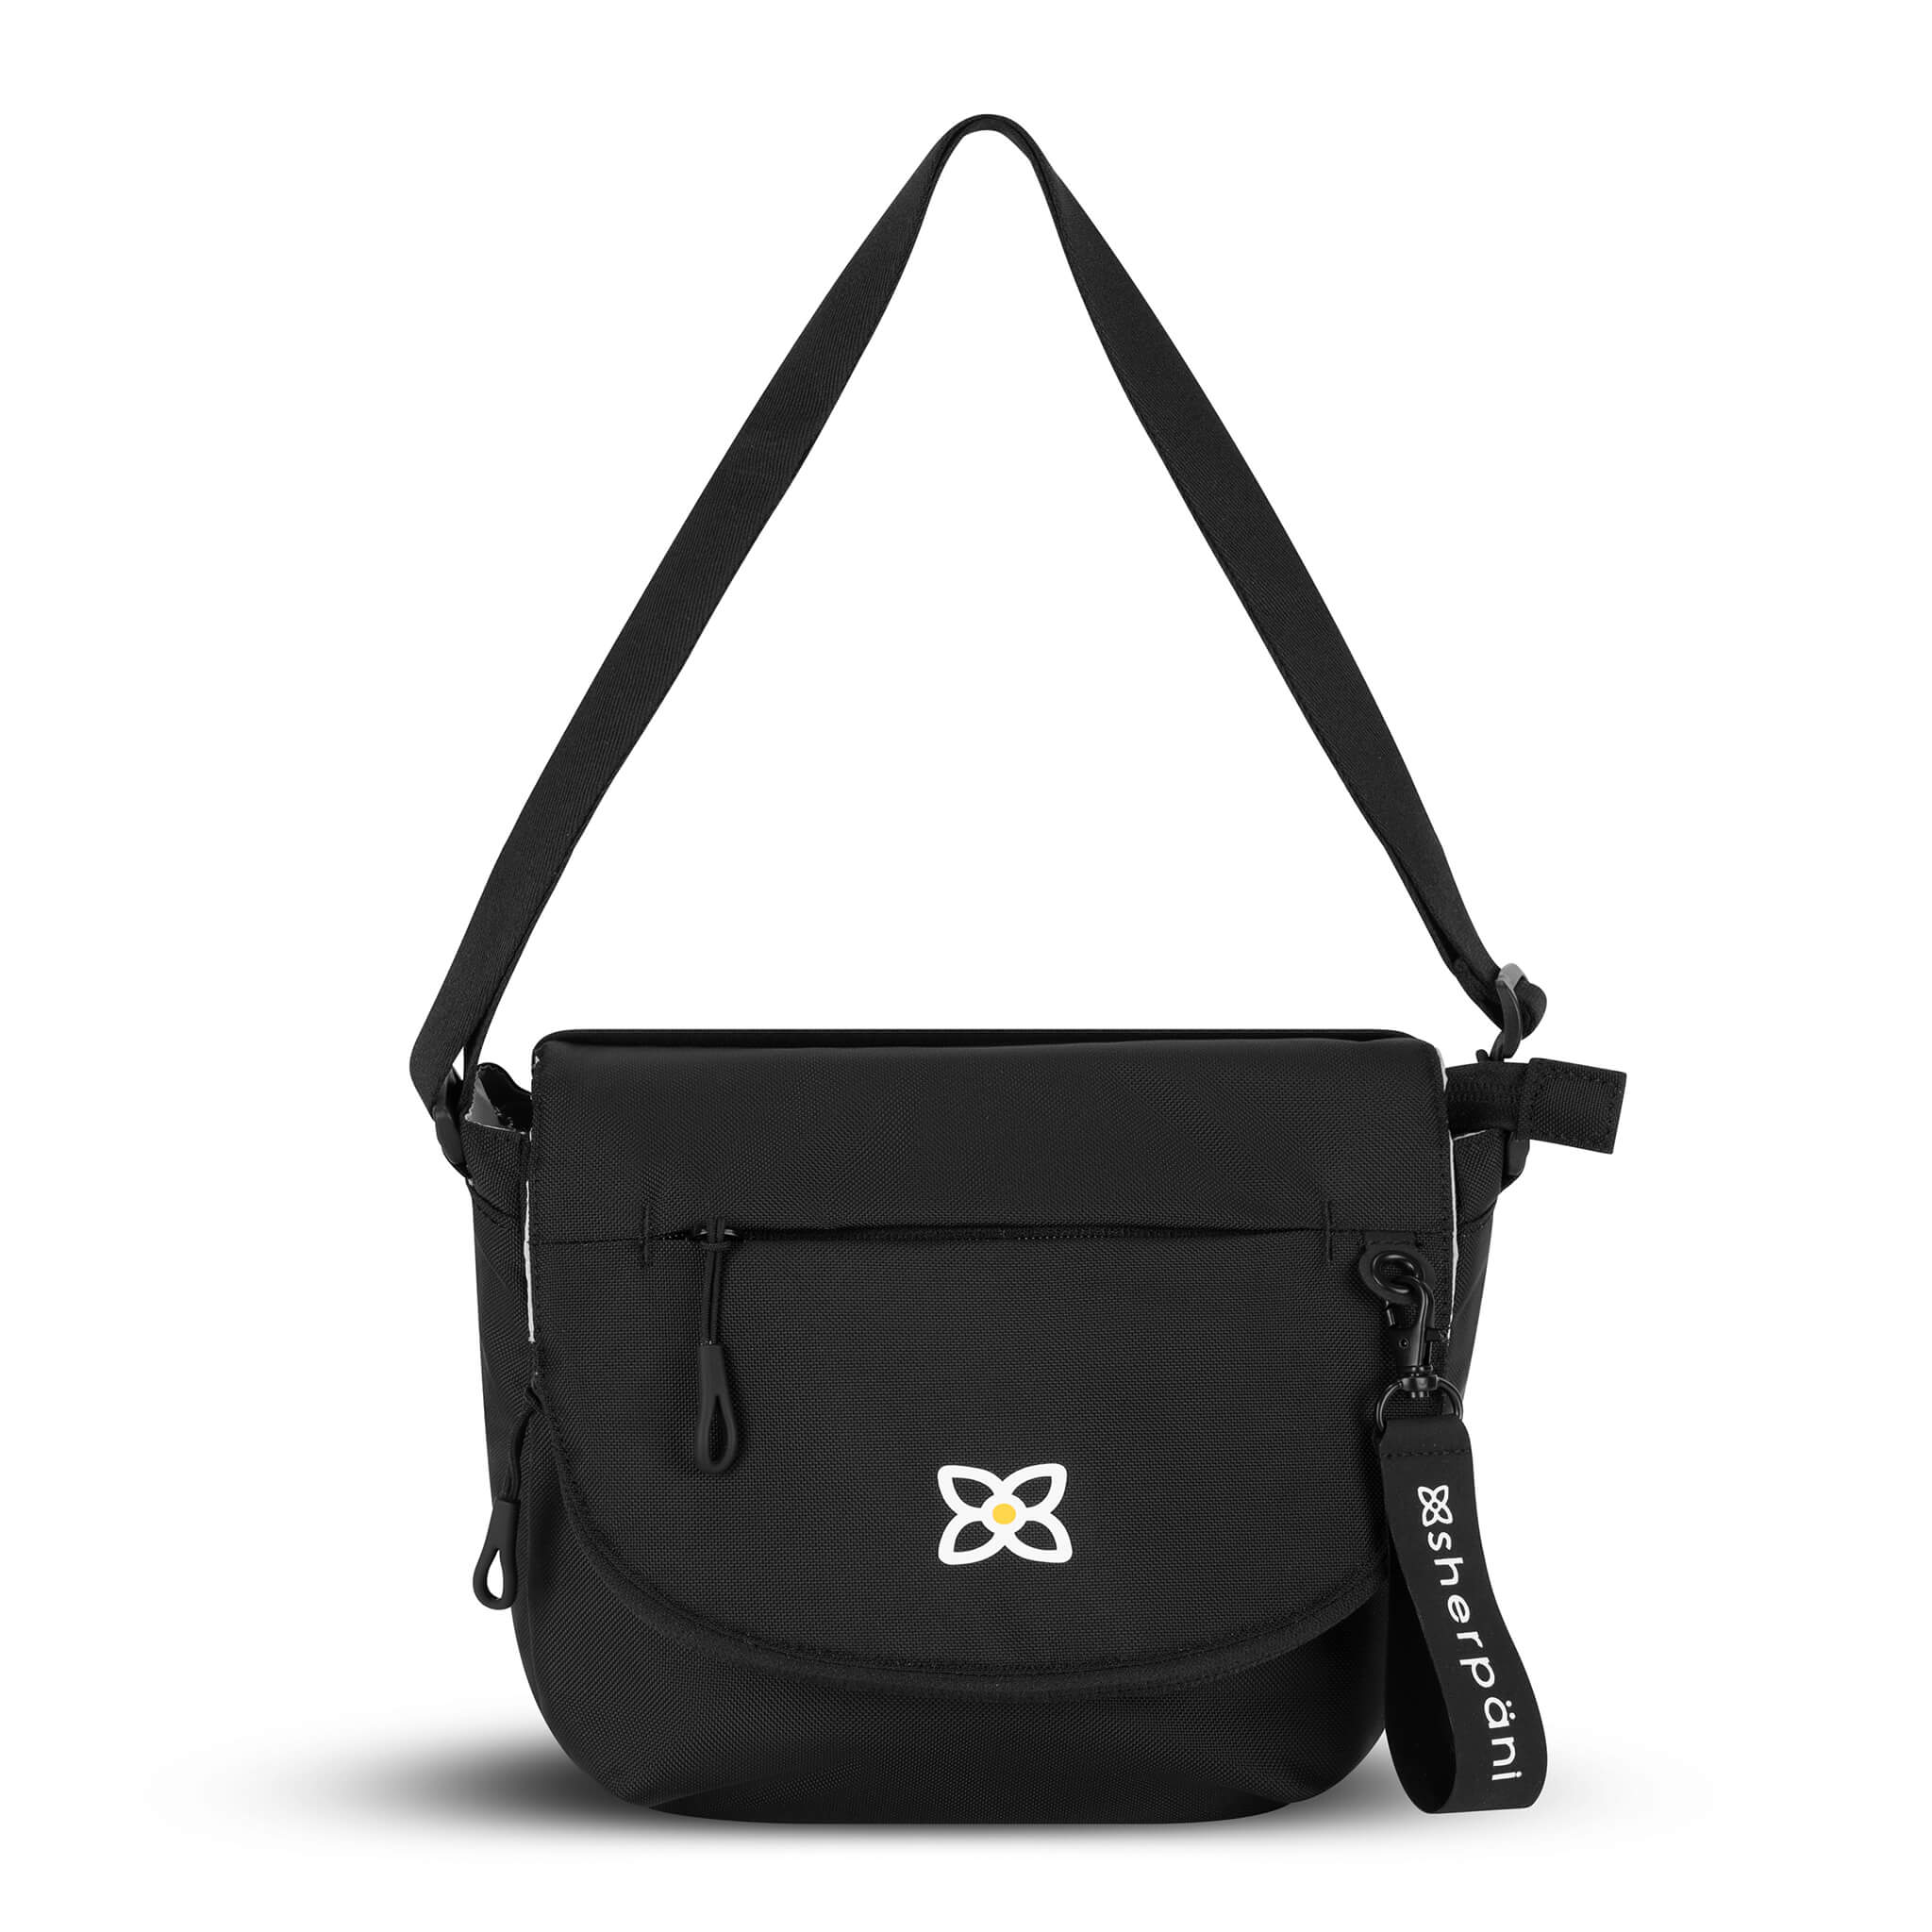 Flat front view of Sherpani messenger satchel bag, the Milli in Raven. Milli features include an adjustable crossbody strap, front zipper pocket, brimmed zipper pocket, detachable keychain, magnetic closure, RFID security and multiple internal pockets for organization. The Raven color is a true black with Sherpani logo (edelweiss flower) accented in white. 